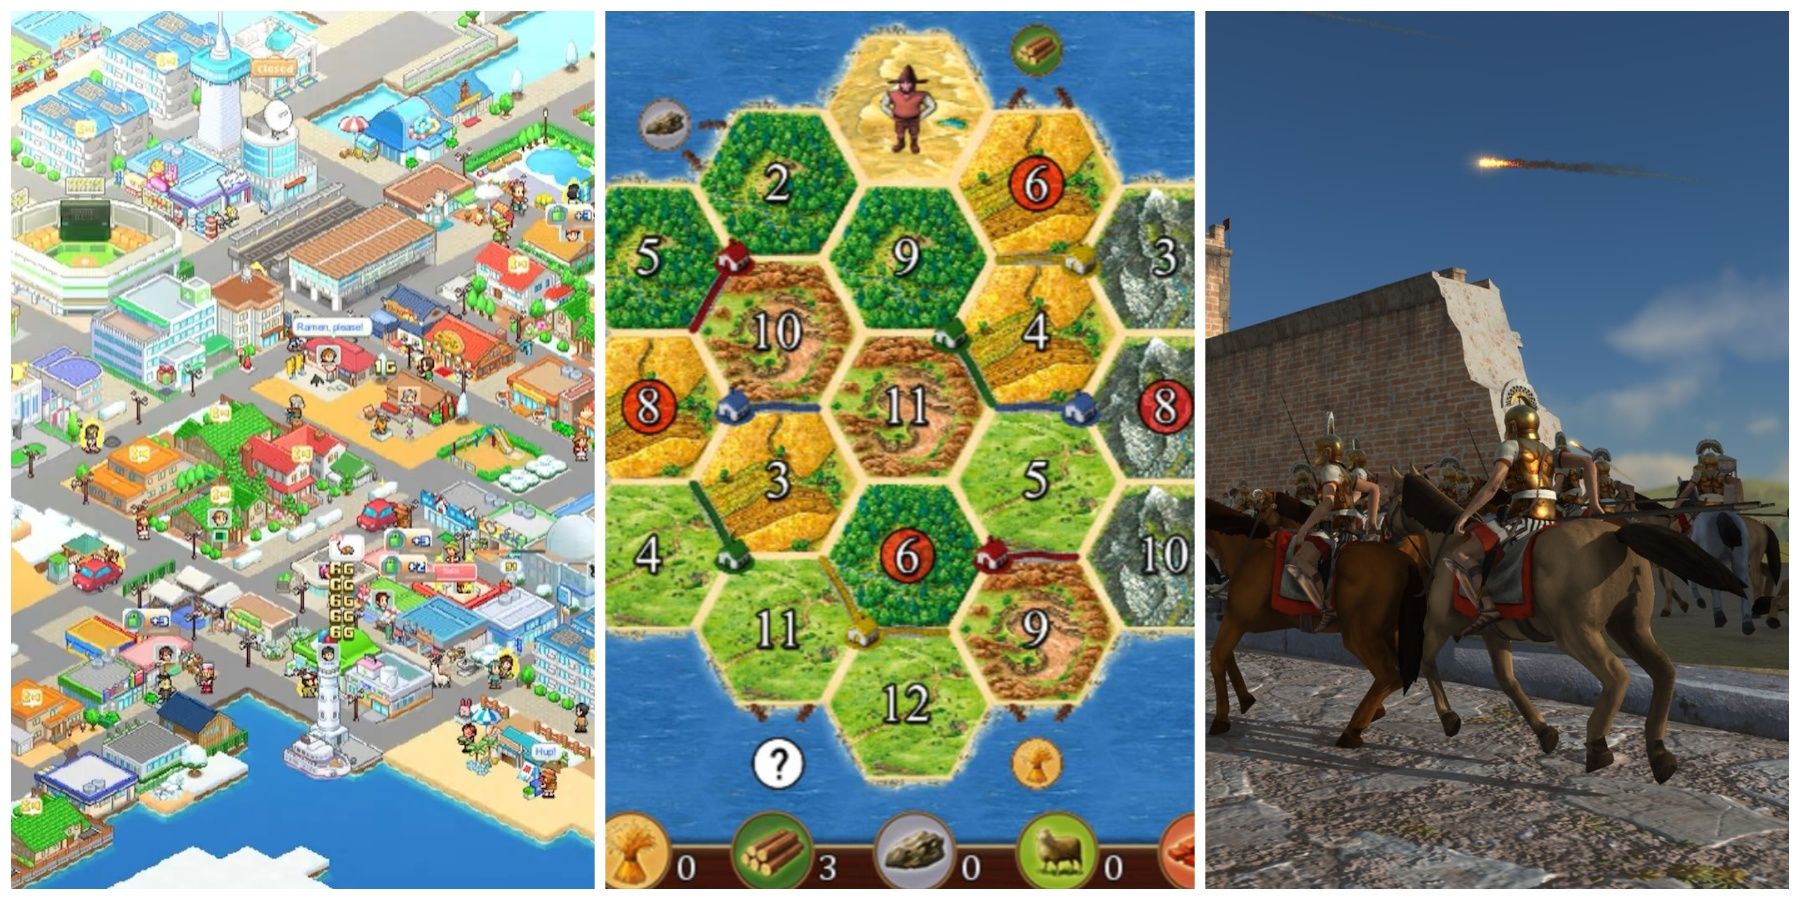 Featured image of mobile strategy games that aren't free-to-play like Dream Town Island, Catan Classic, and Rome: Total War